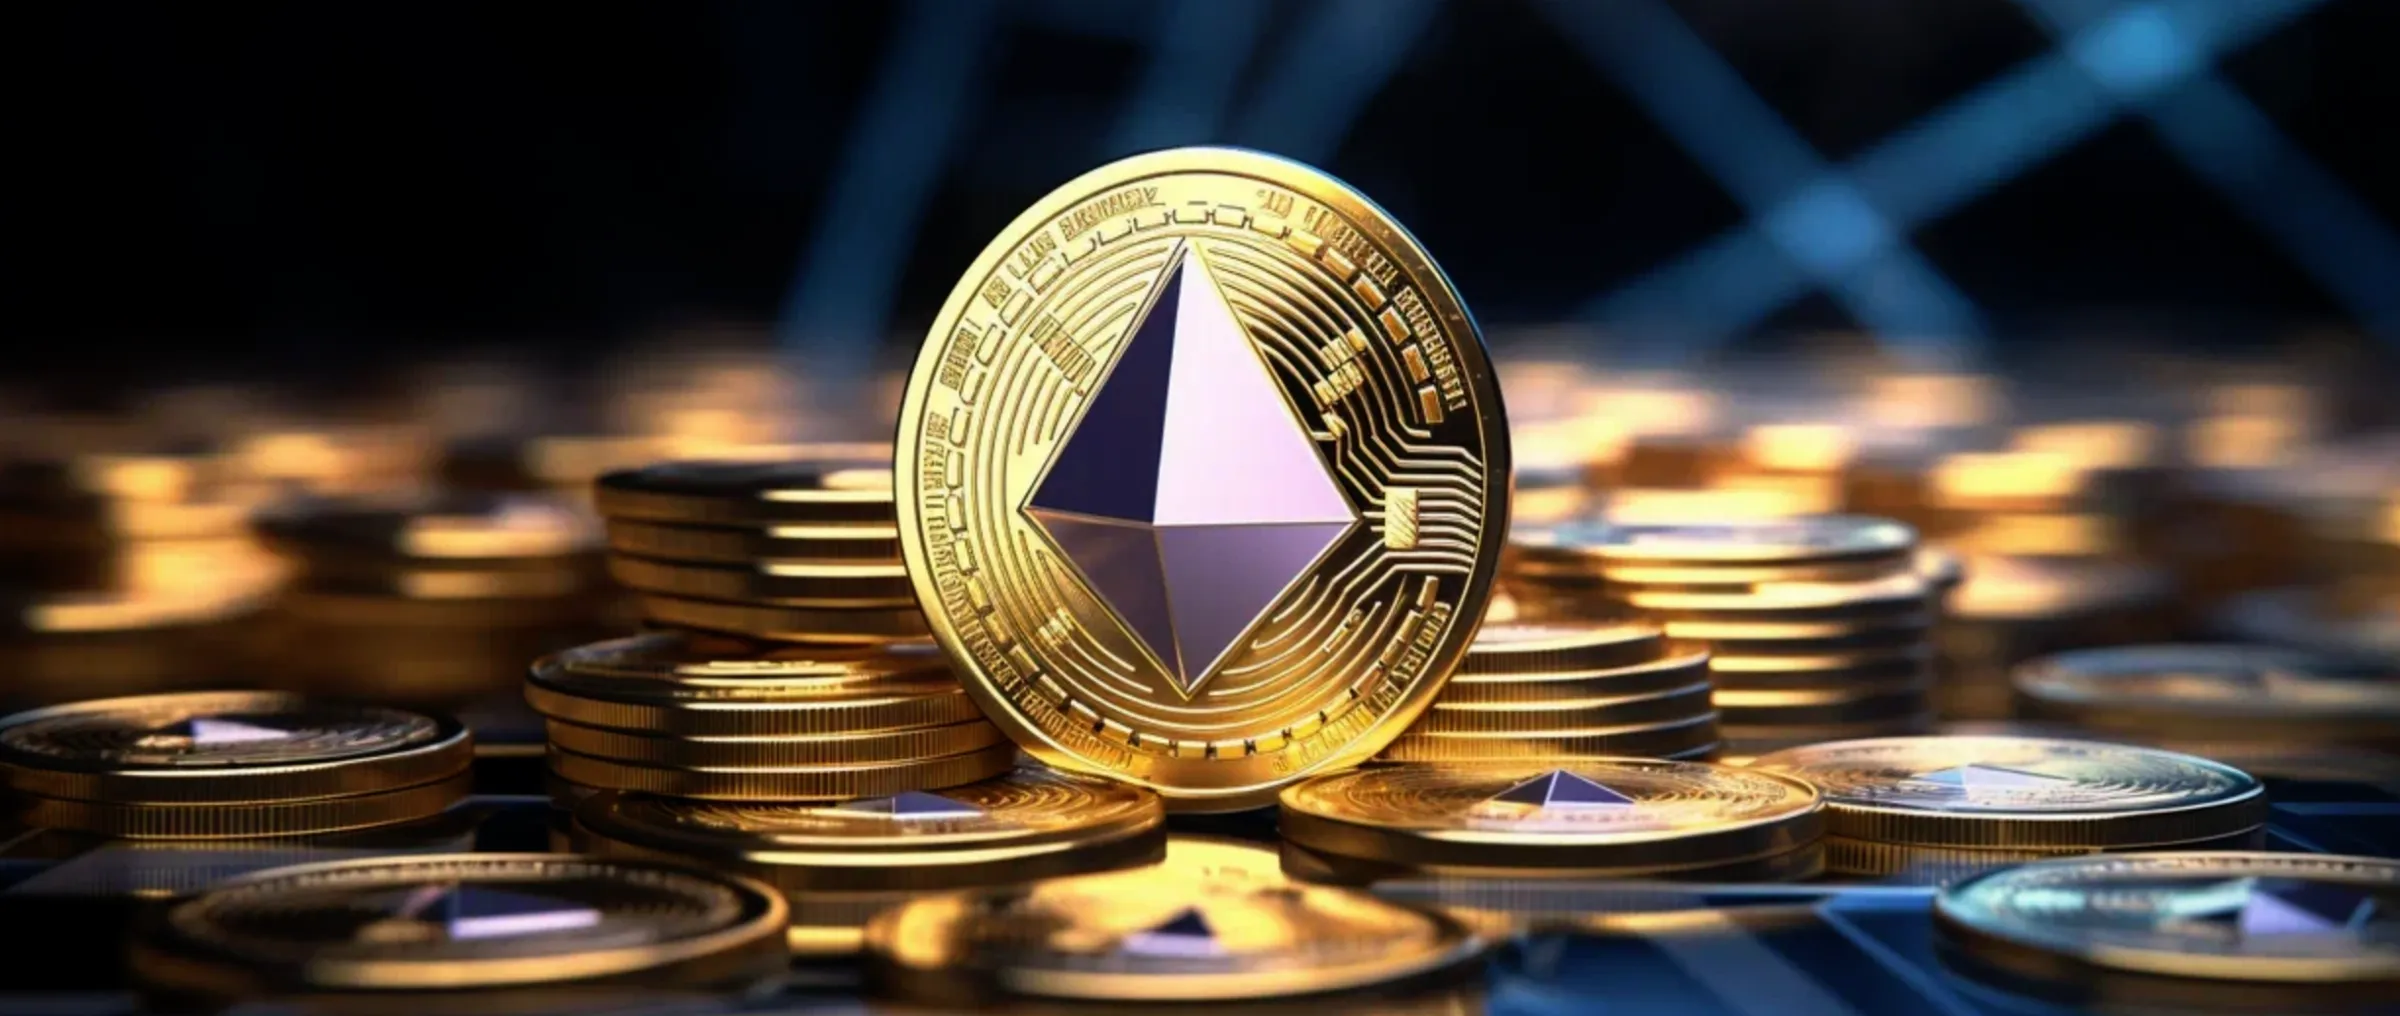 What could prevent Ethereum from reaching $4,000 in the foreseeable future?